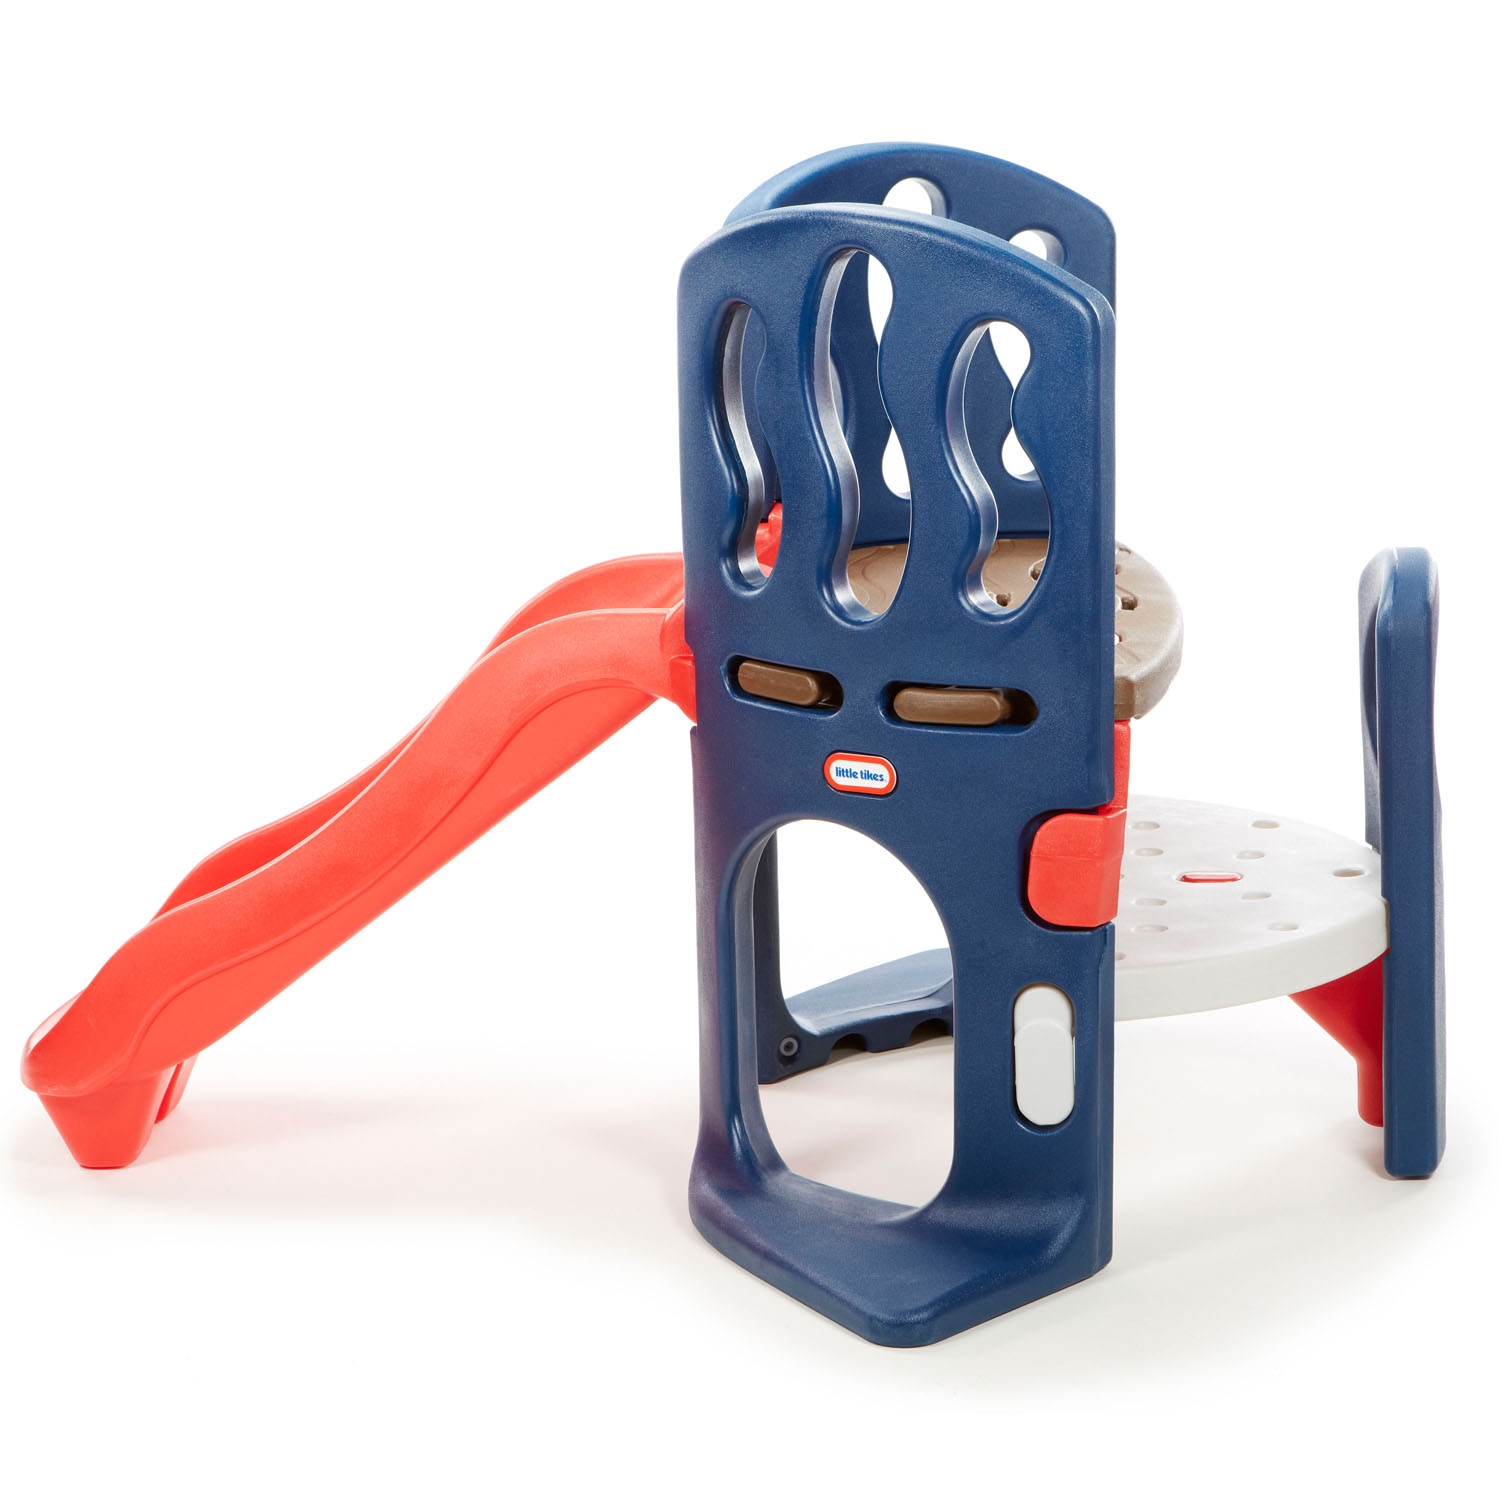 Little Tikes Hide & Slide Climber, Blue & Red - Climbing Toy and Slide for Kids Ages 2 to 6 - image 5 of 6